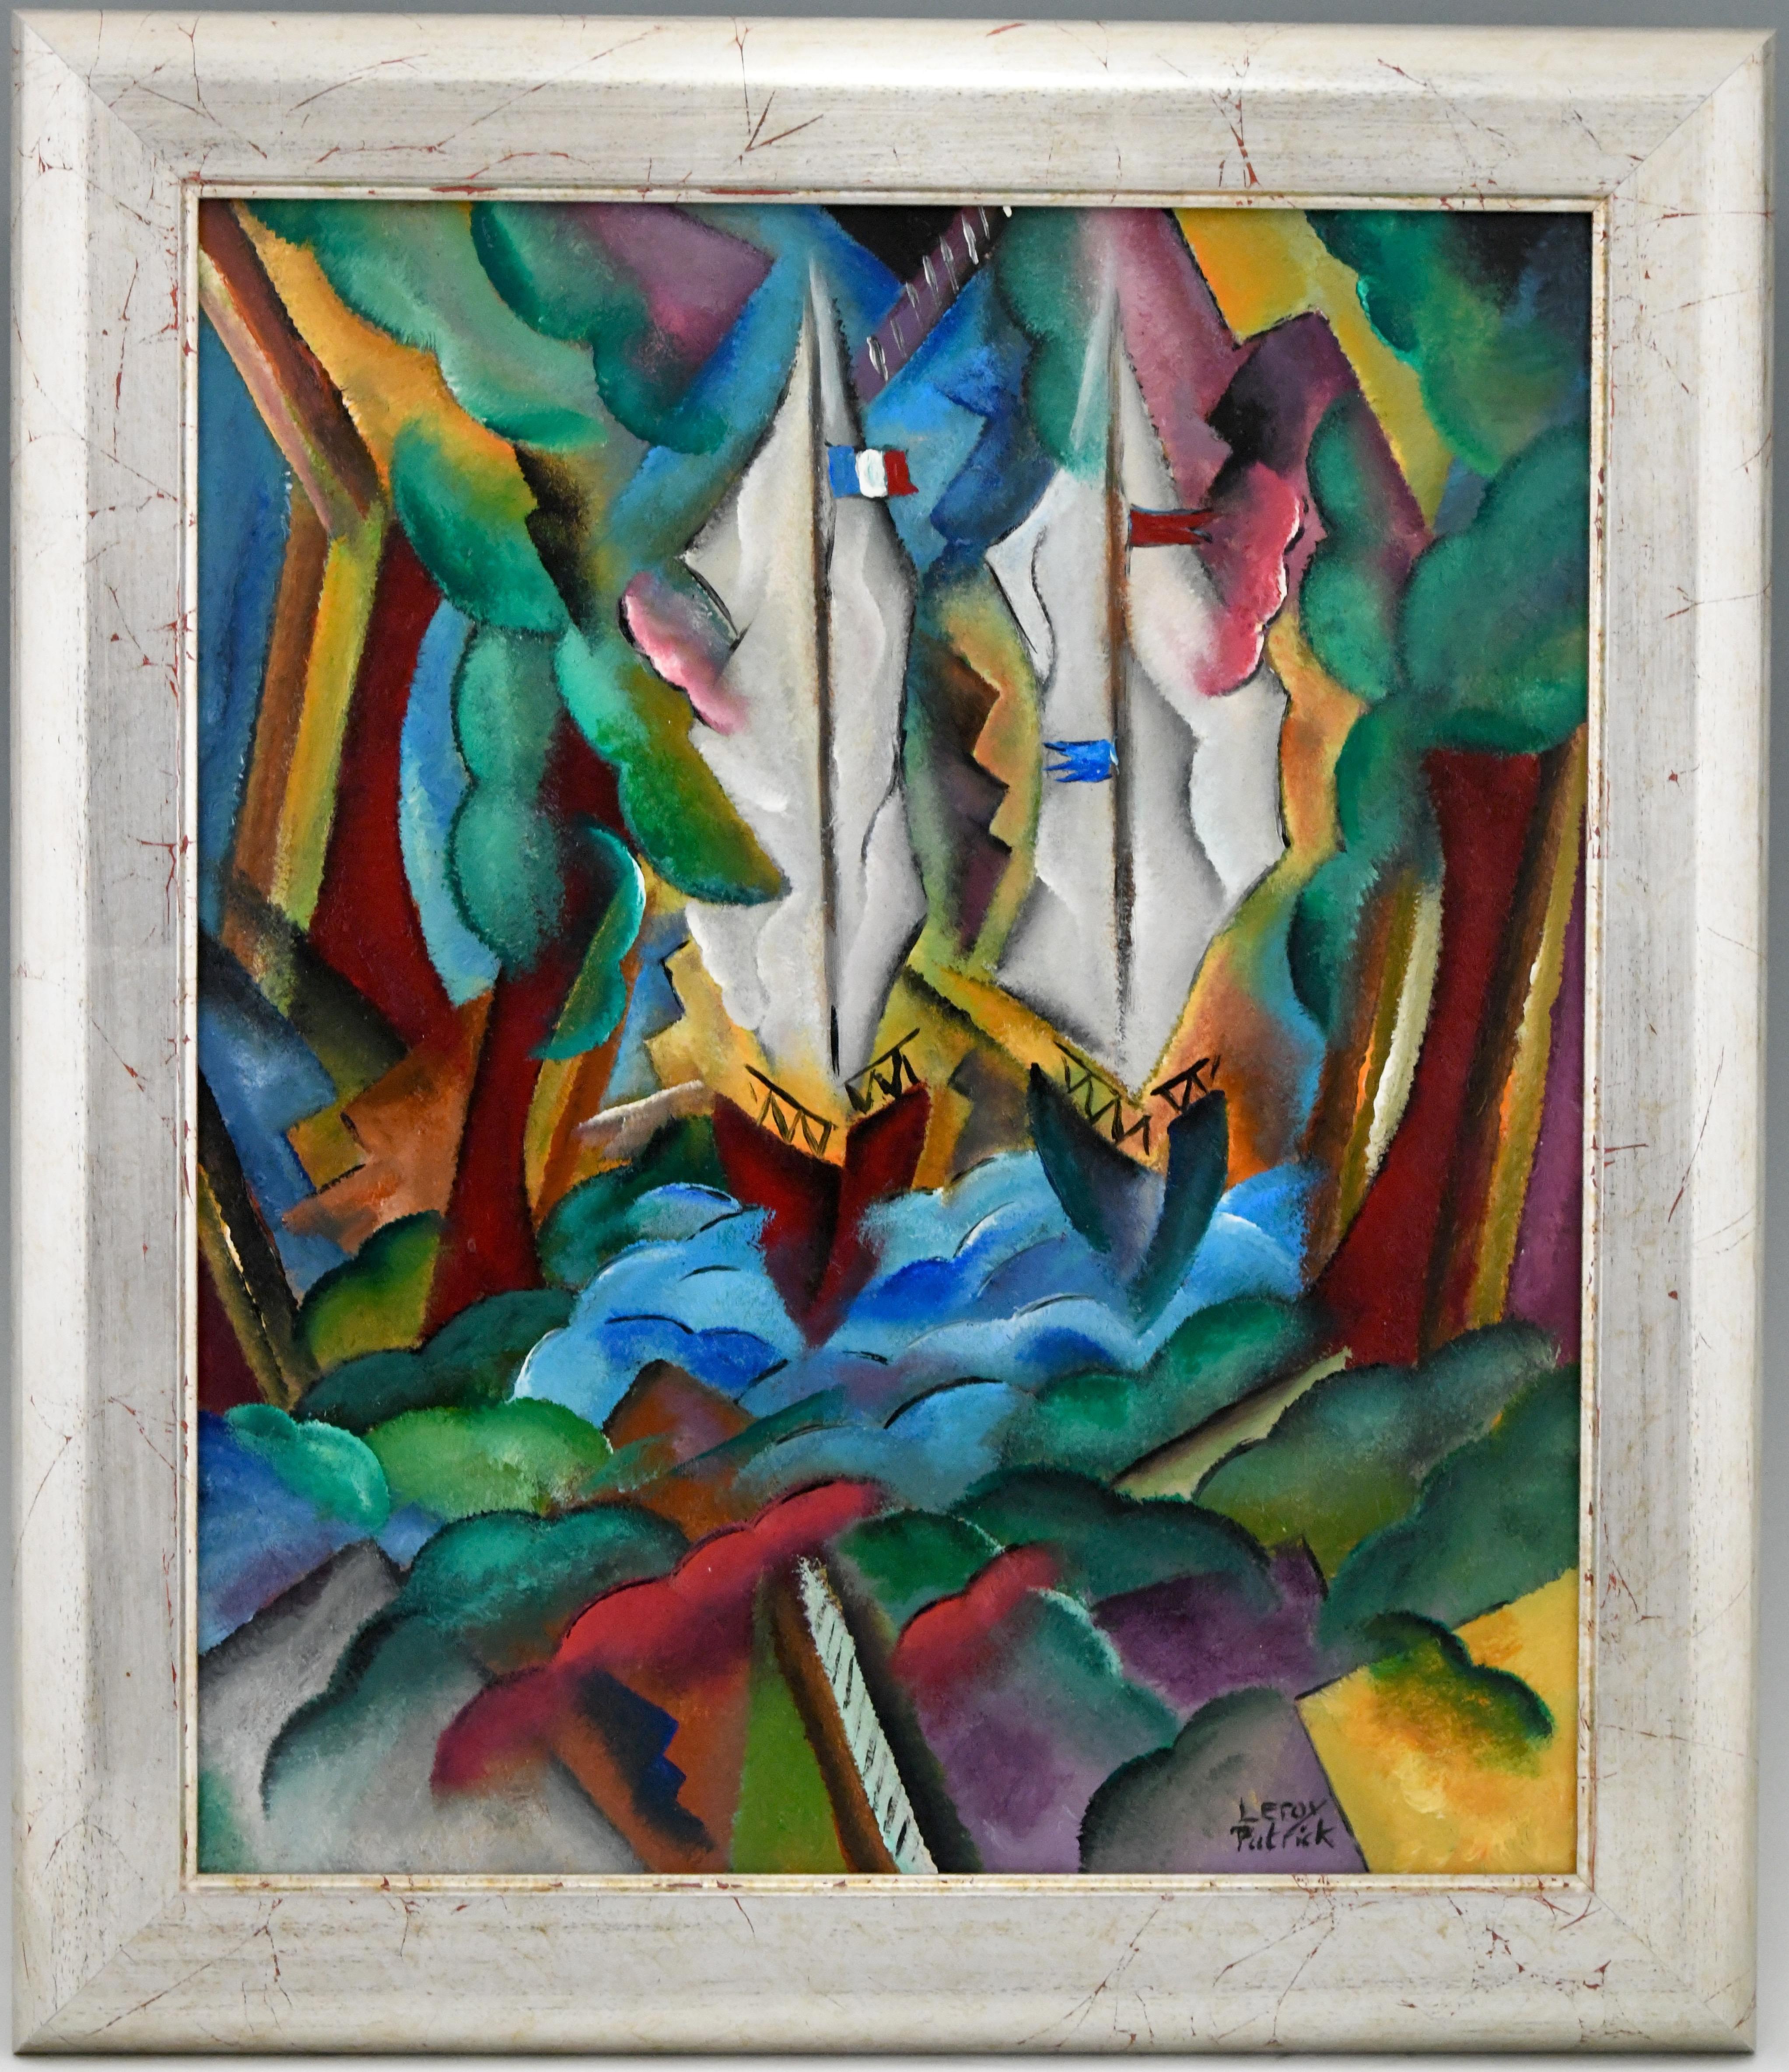 Art Deco style painting landscape with sailing boats by the French artist Patrick Leroy.
The work is in a very good condition and has a contemporary leaf silver frame.
Size of the frame:
H. 73 cm x L. 63 cm. x W. 3.5 cm.
H. 28.7 inch x L. 25